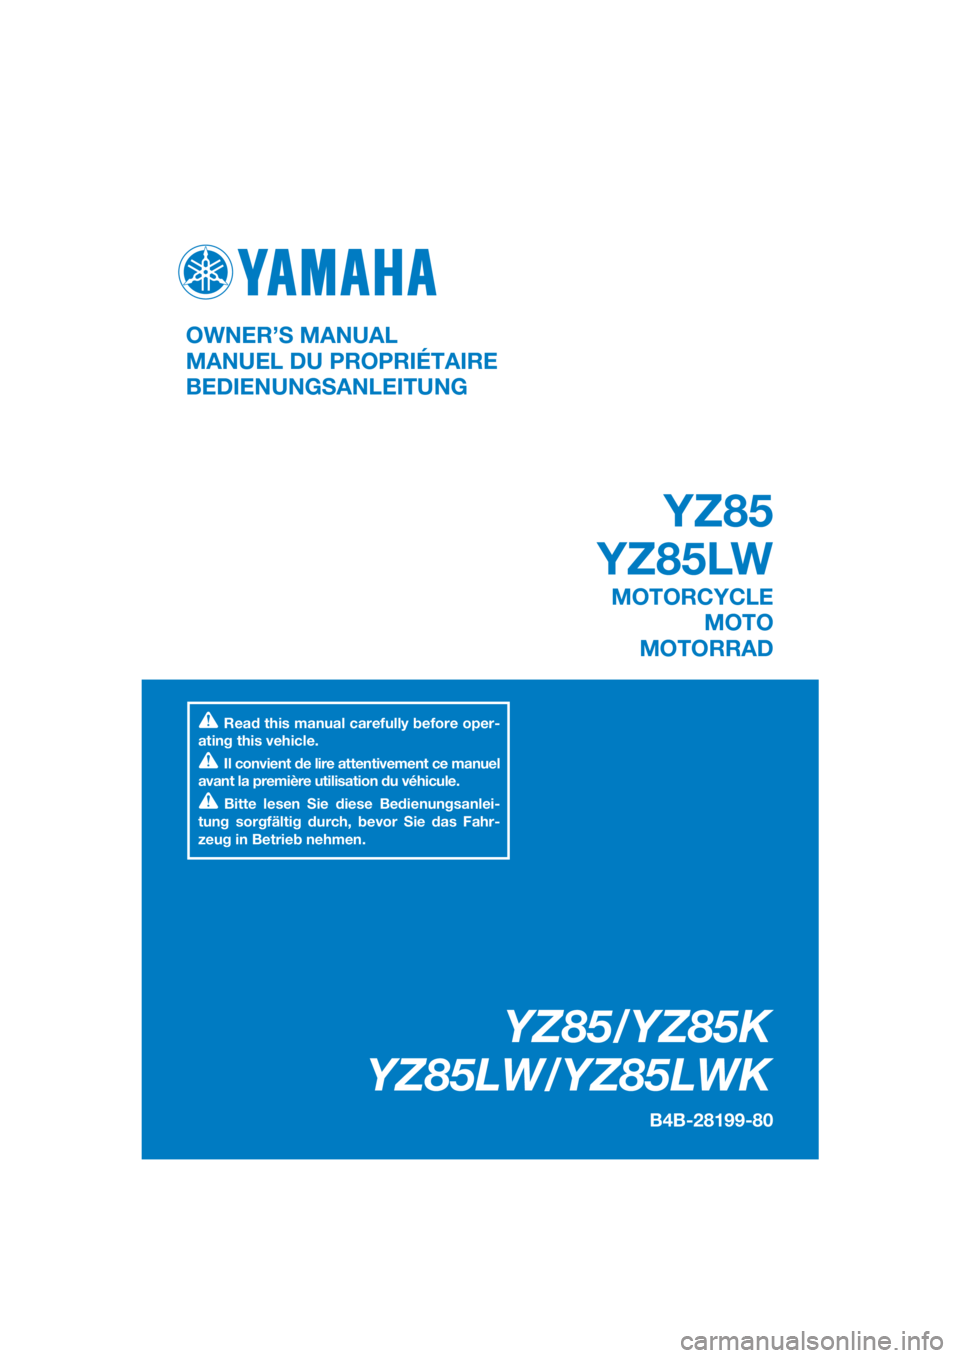 YAMAHA YZ85 2019  Owners Manual DIC183
YZ85/YZ85K
YZ85LW/YZ85LWK
B4B-28199-80
OWNER’S MANUAL
MANUEL DU PROPRIÉTAIRE
BEDIENUNGSANLEITUNG
Read this manual carefully before oper-
ating this vehicle.
Il convient de lire attentivement